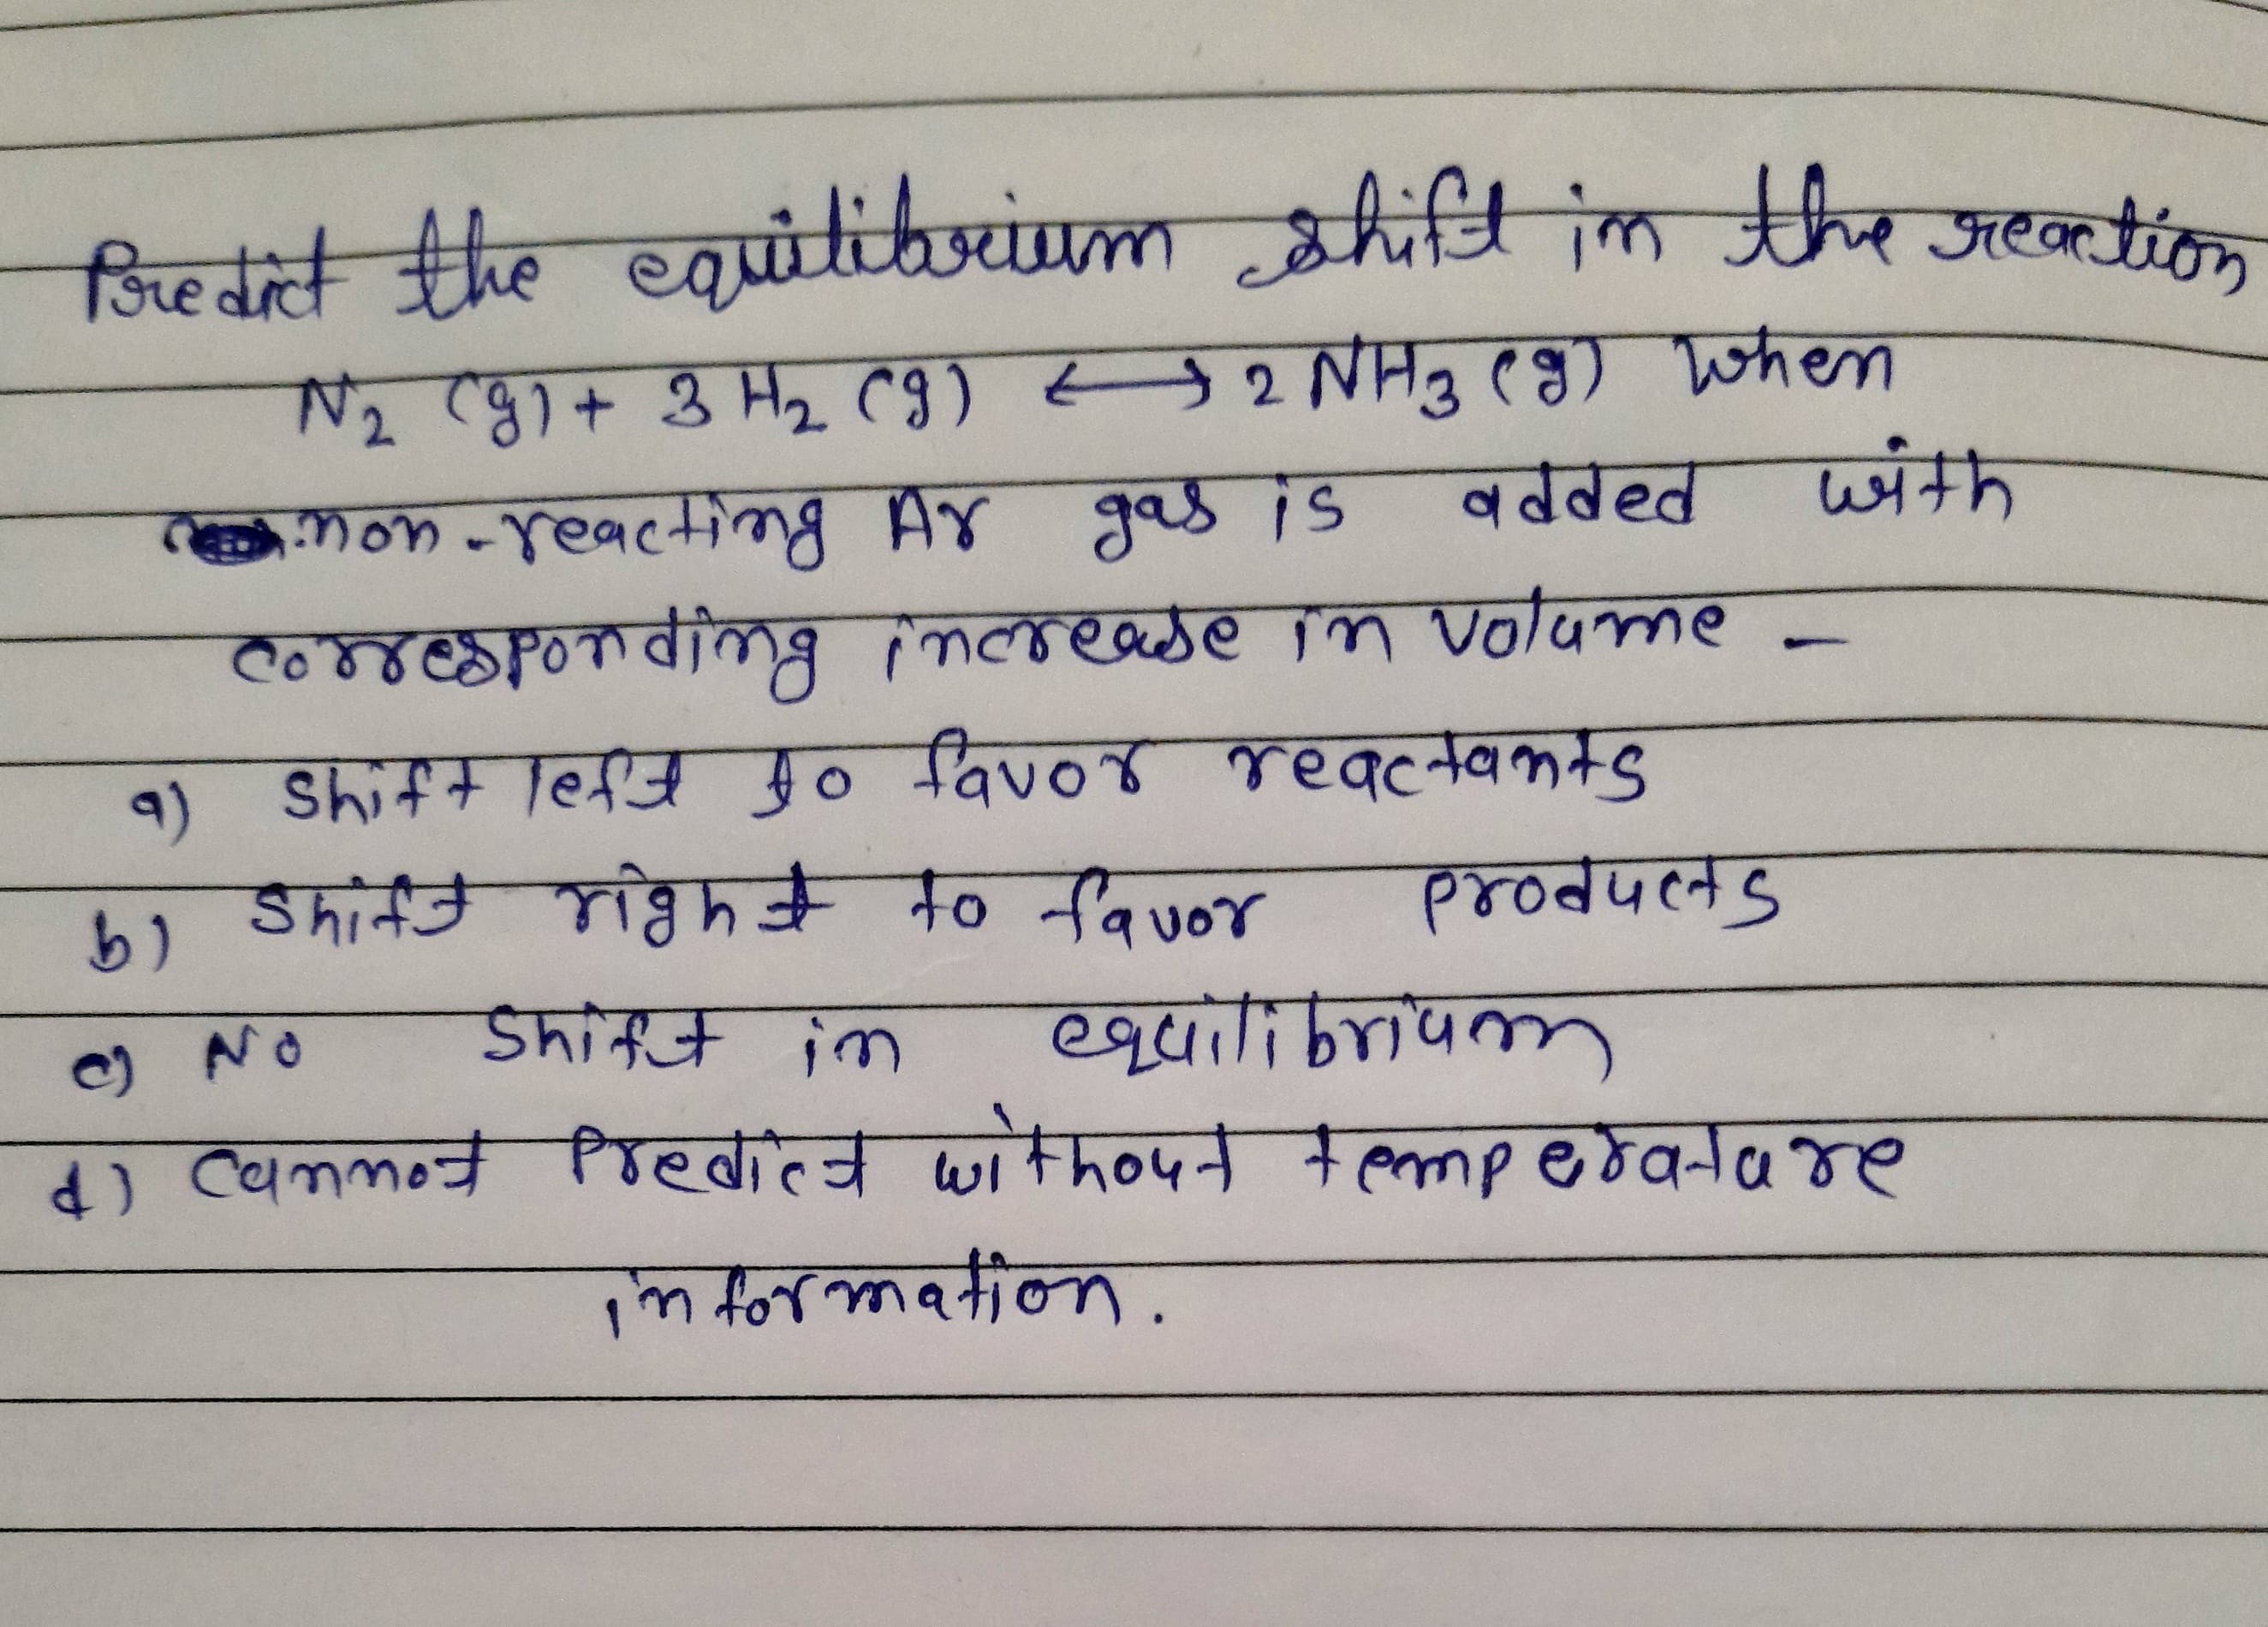 fore dict the
equitibrium shift im the
Treartion
mon -reacting Ay gas is
वढवहत
with
Co8respondimg increade in Volume
9) Shift left fo favor reactants
Shift right to fauo
१४०d५लड
O NO
Shift im
ववा-लपक,
) Cammot Predict witho4t tempedatare
n formation.
